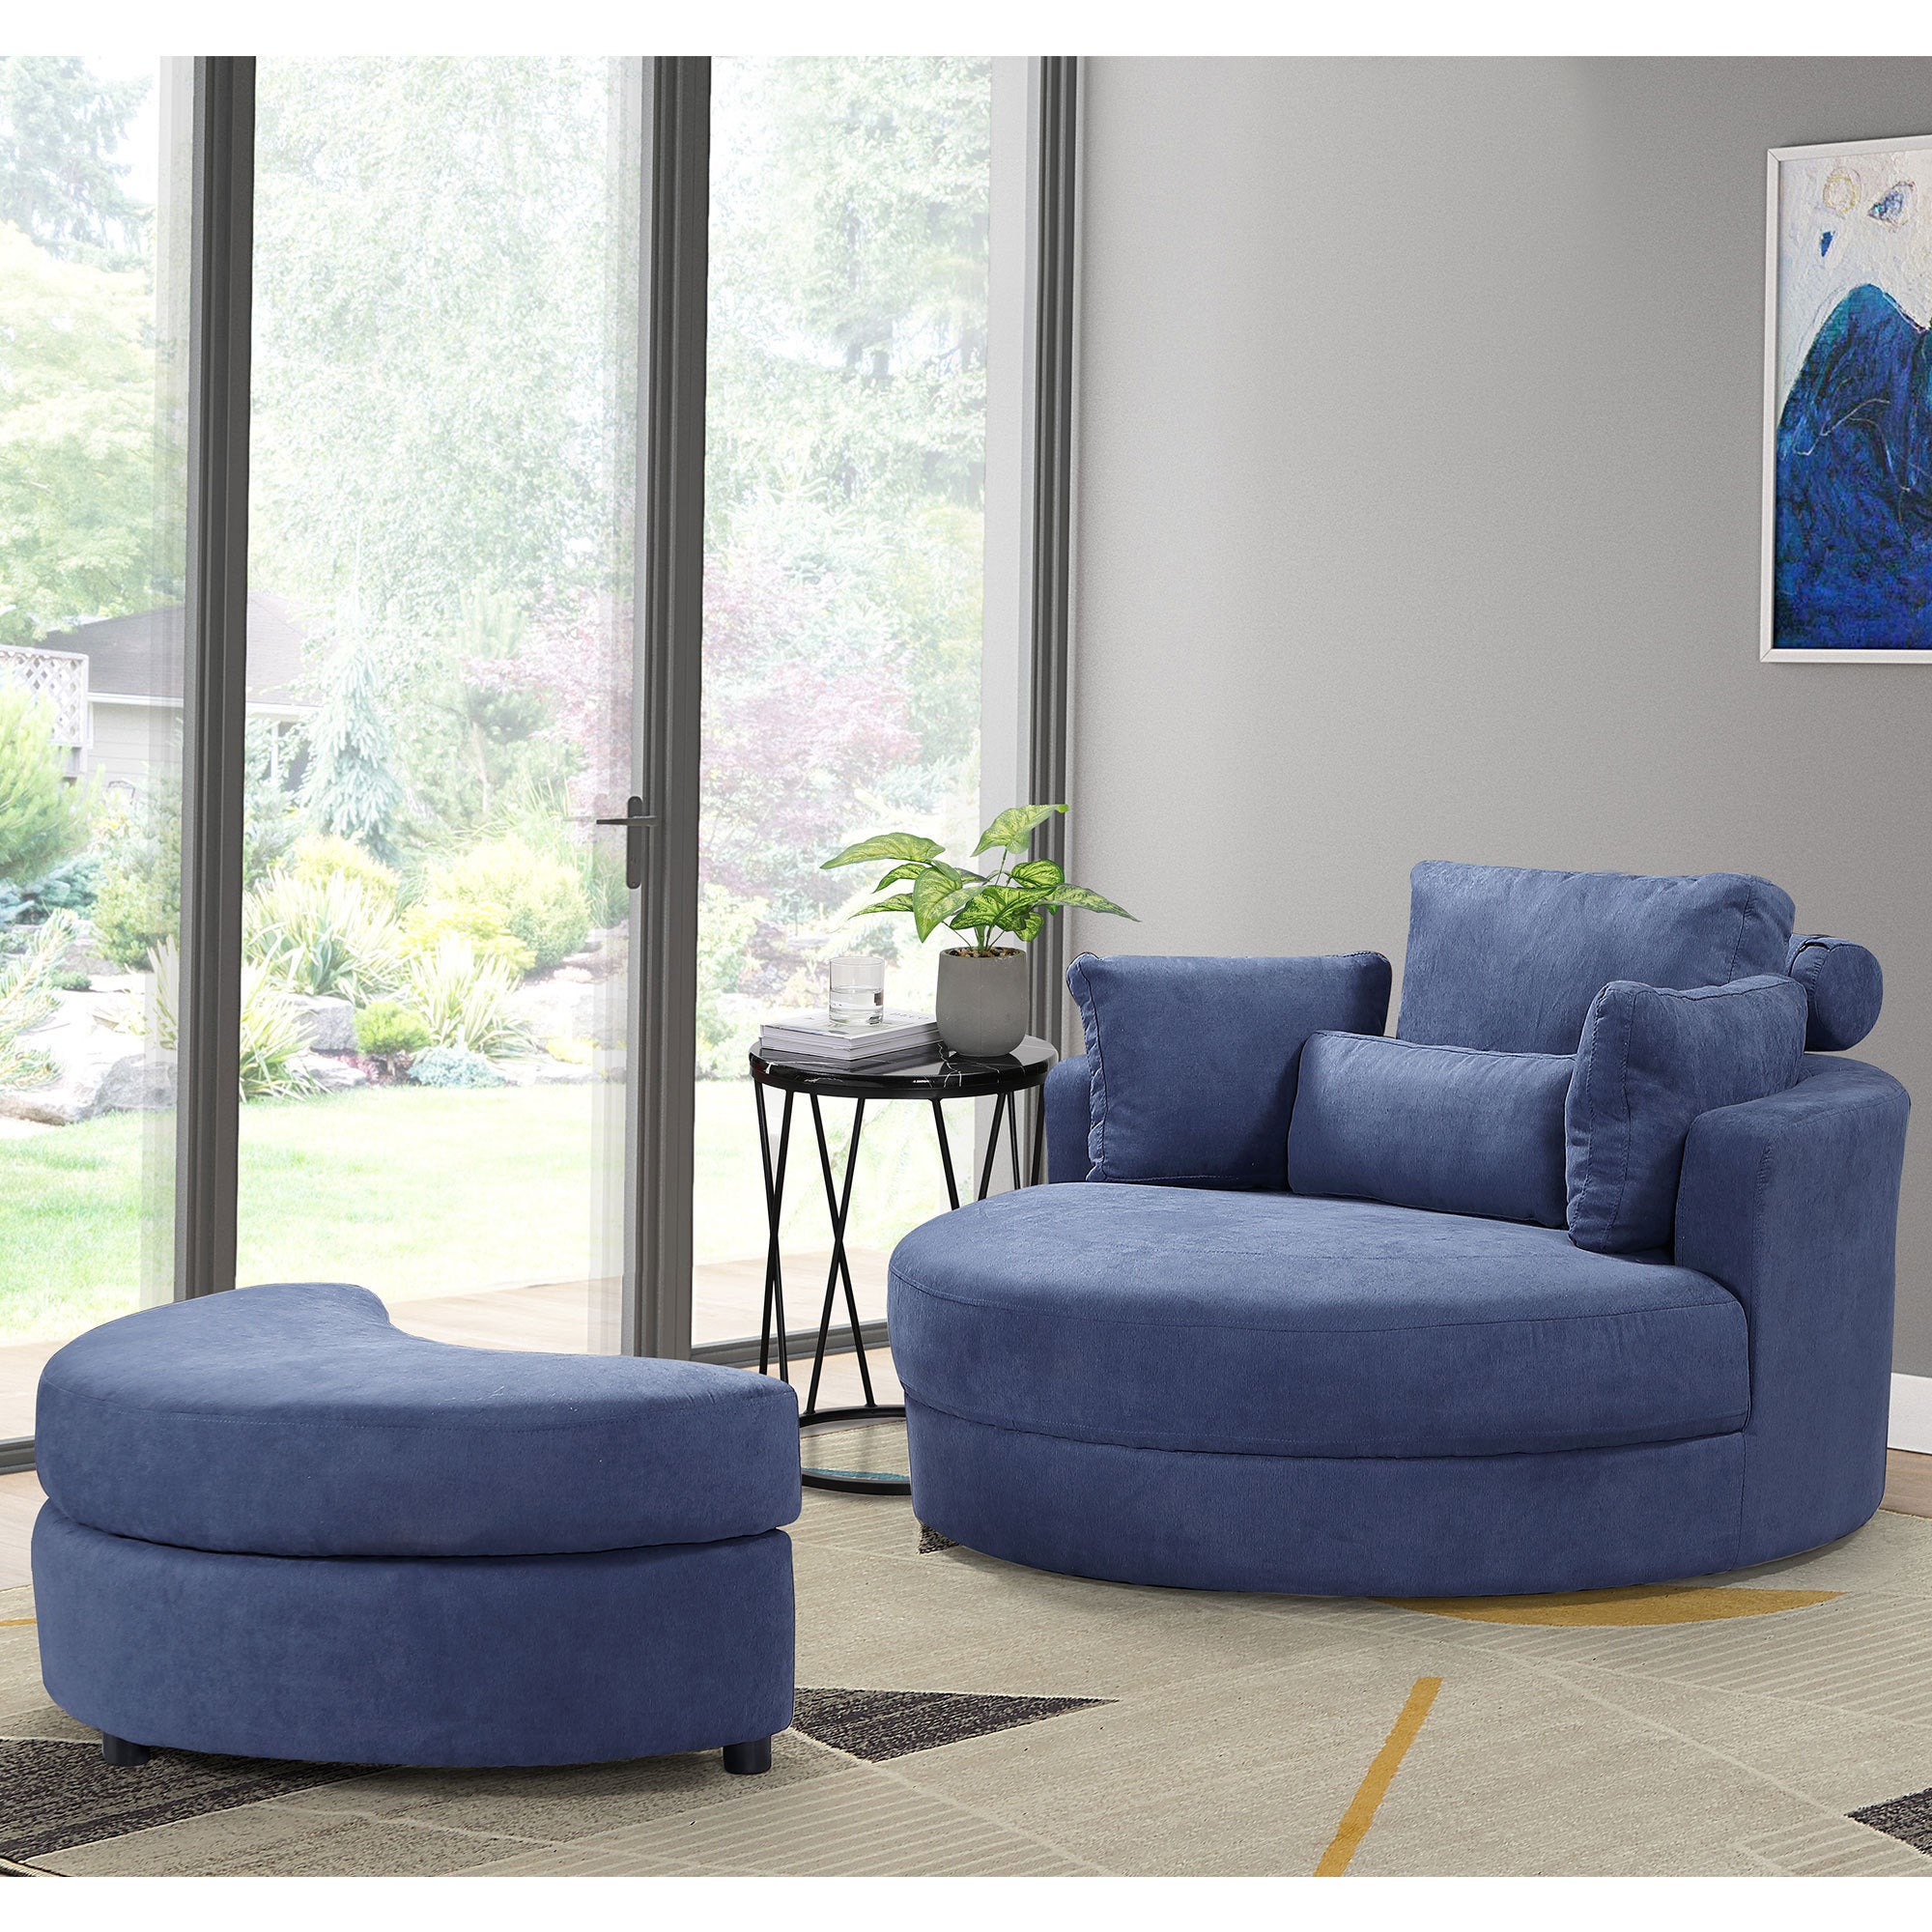 WelLinen Fabric Swivel Accent Barrel Big Round Lounge Sofa Chair with Storage Ottoman and Pillows (Blue)